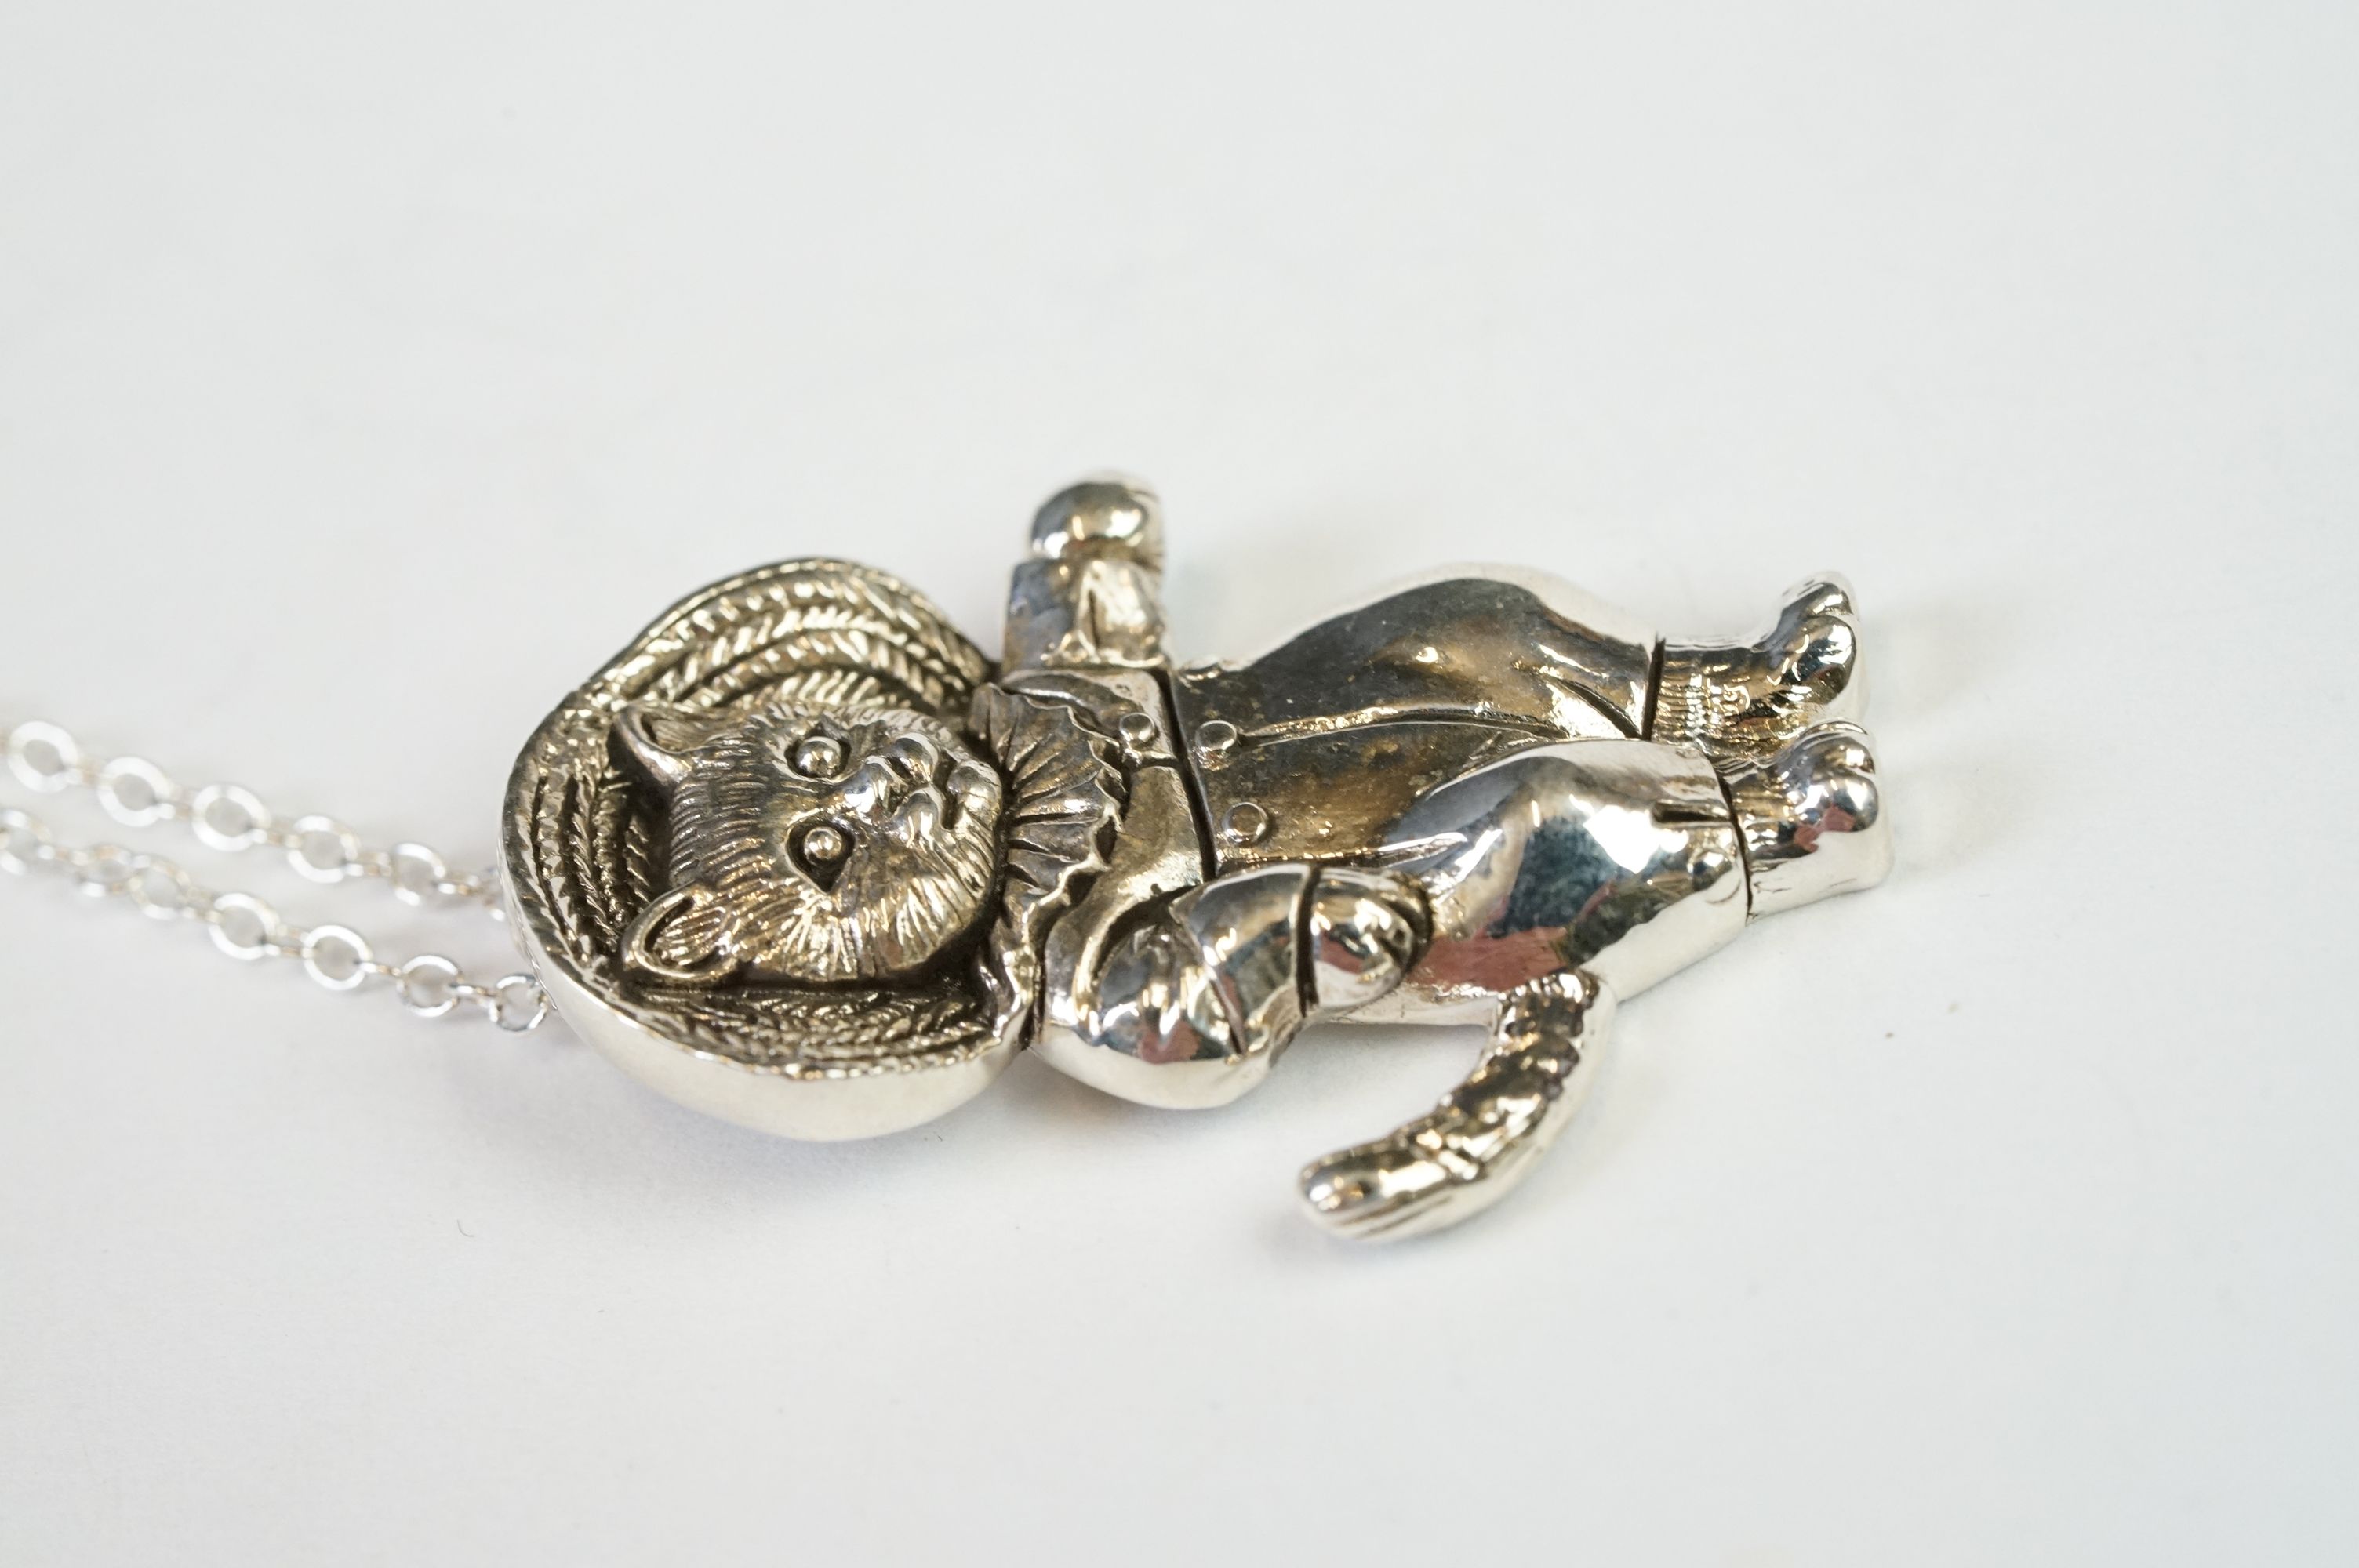 Silver Cat Pendant Necklace in the form of Tom Kitten - Image 3 of 9